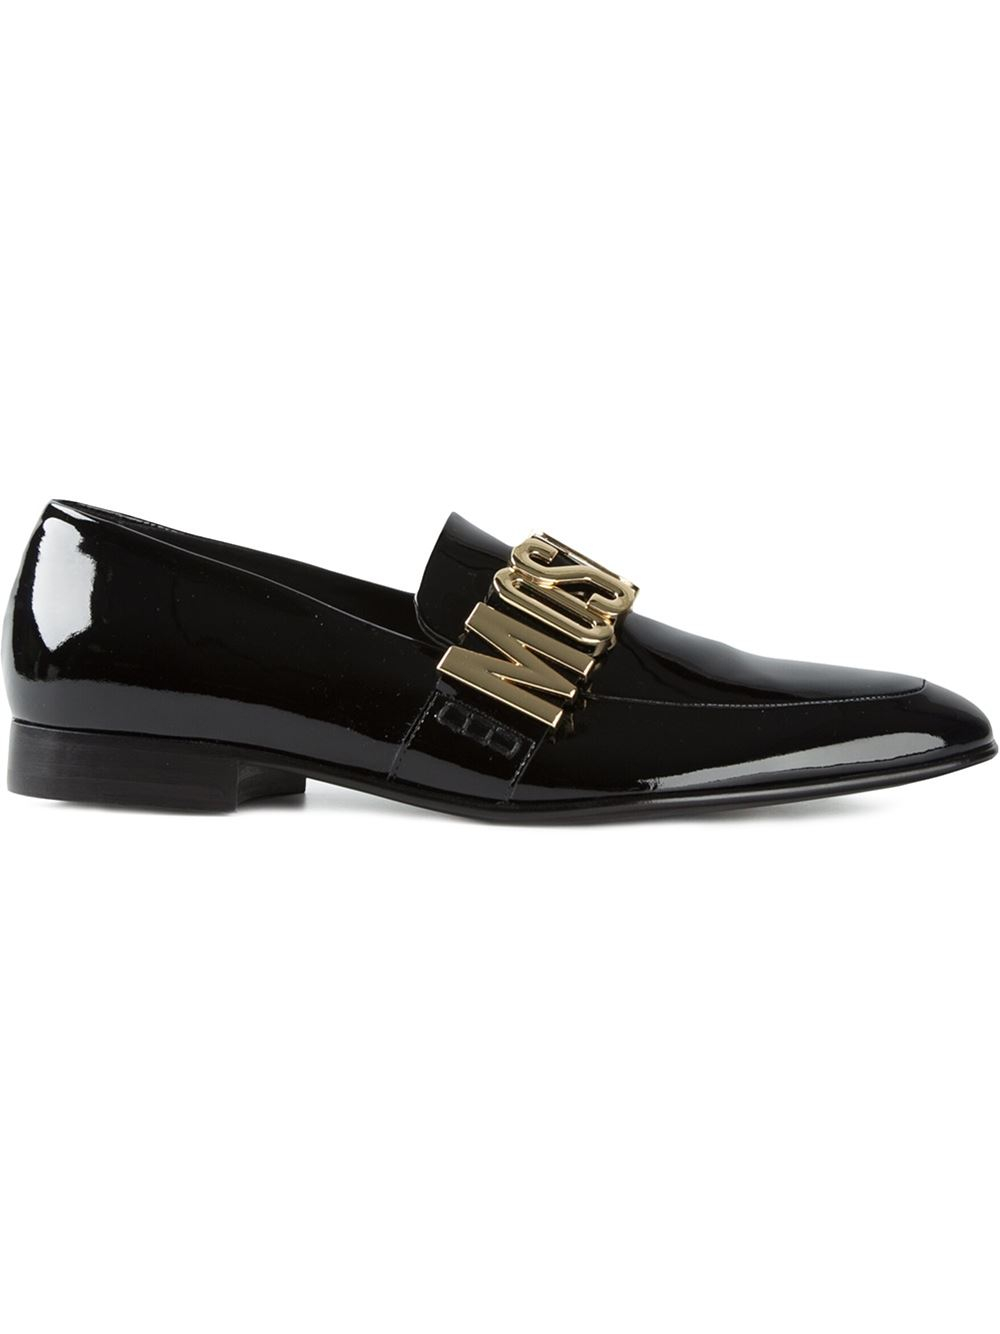 Lyst - Moschino Logo Plaque Slippers in Black for Men